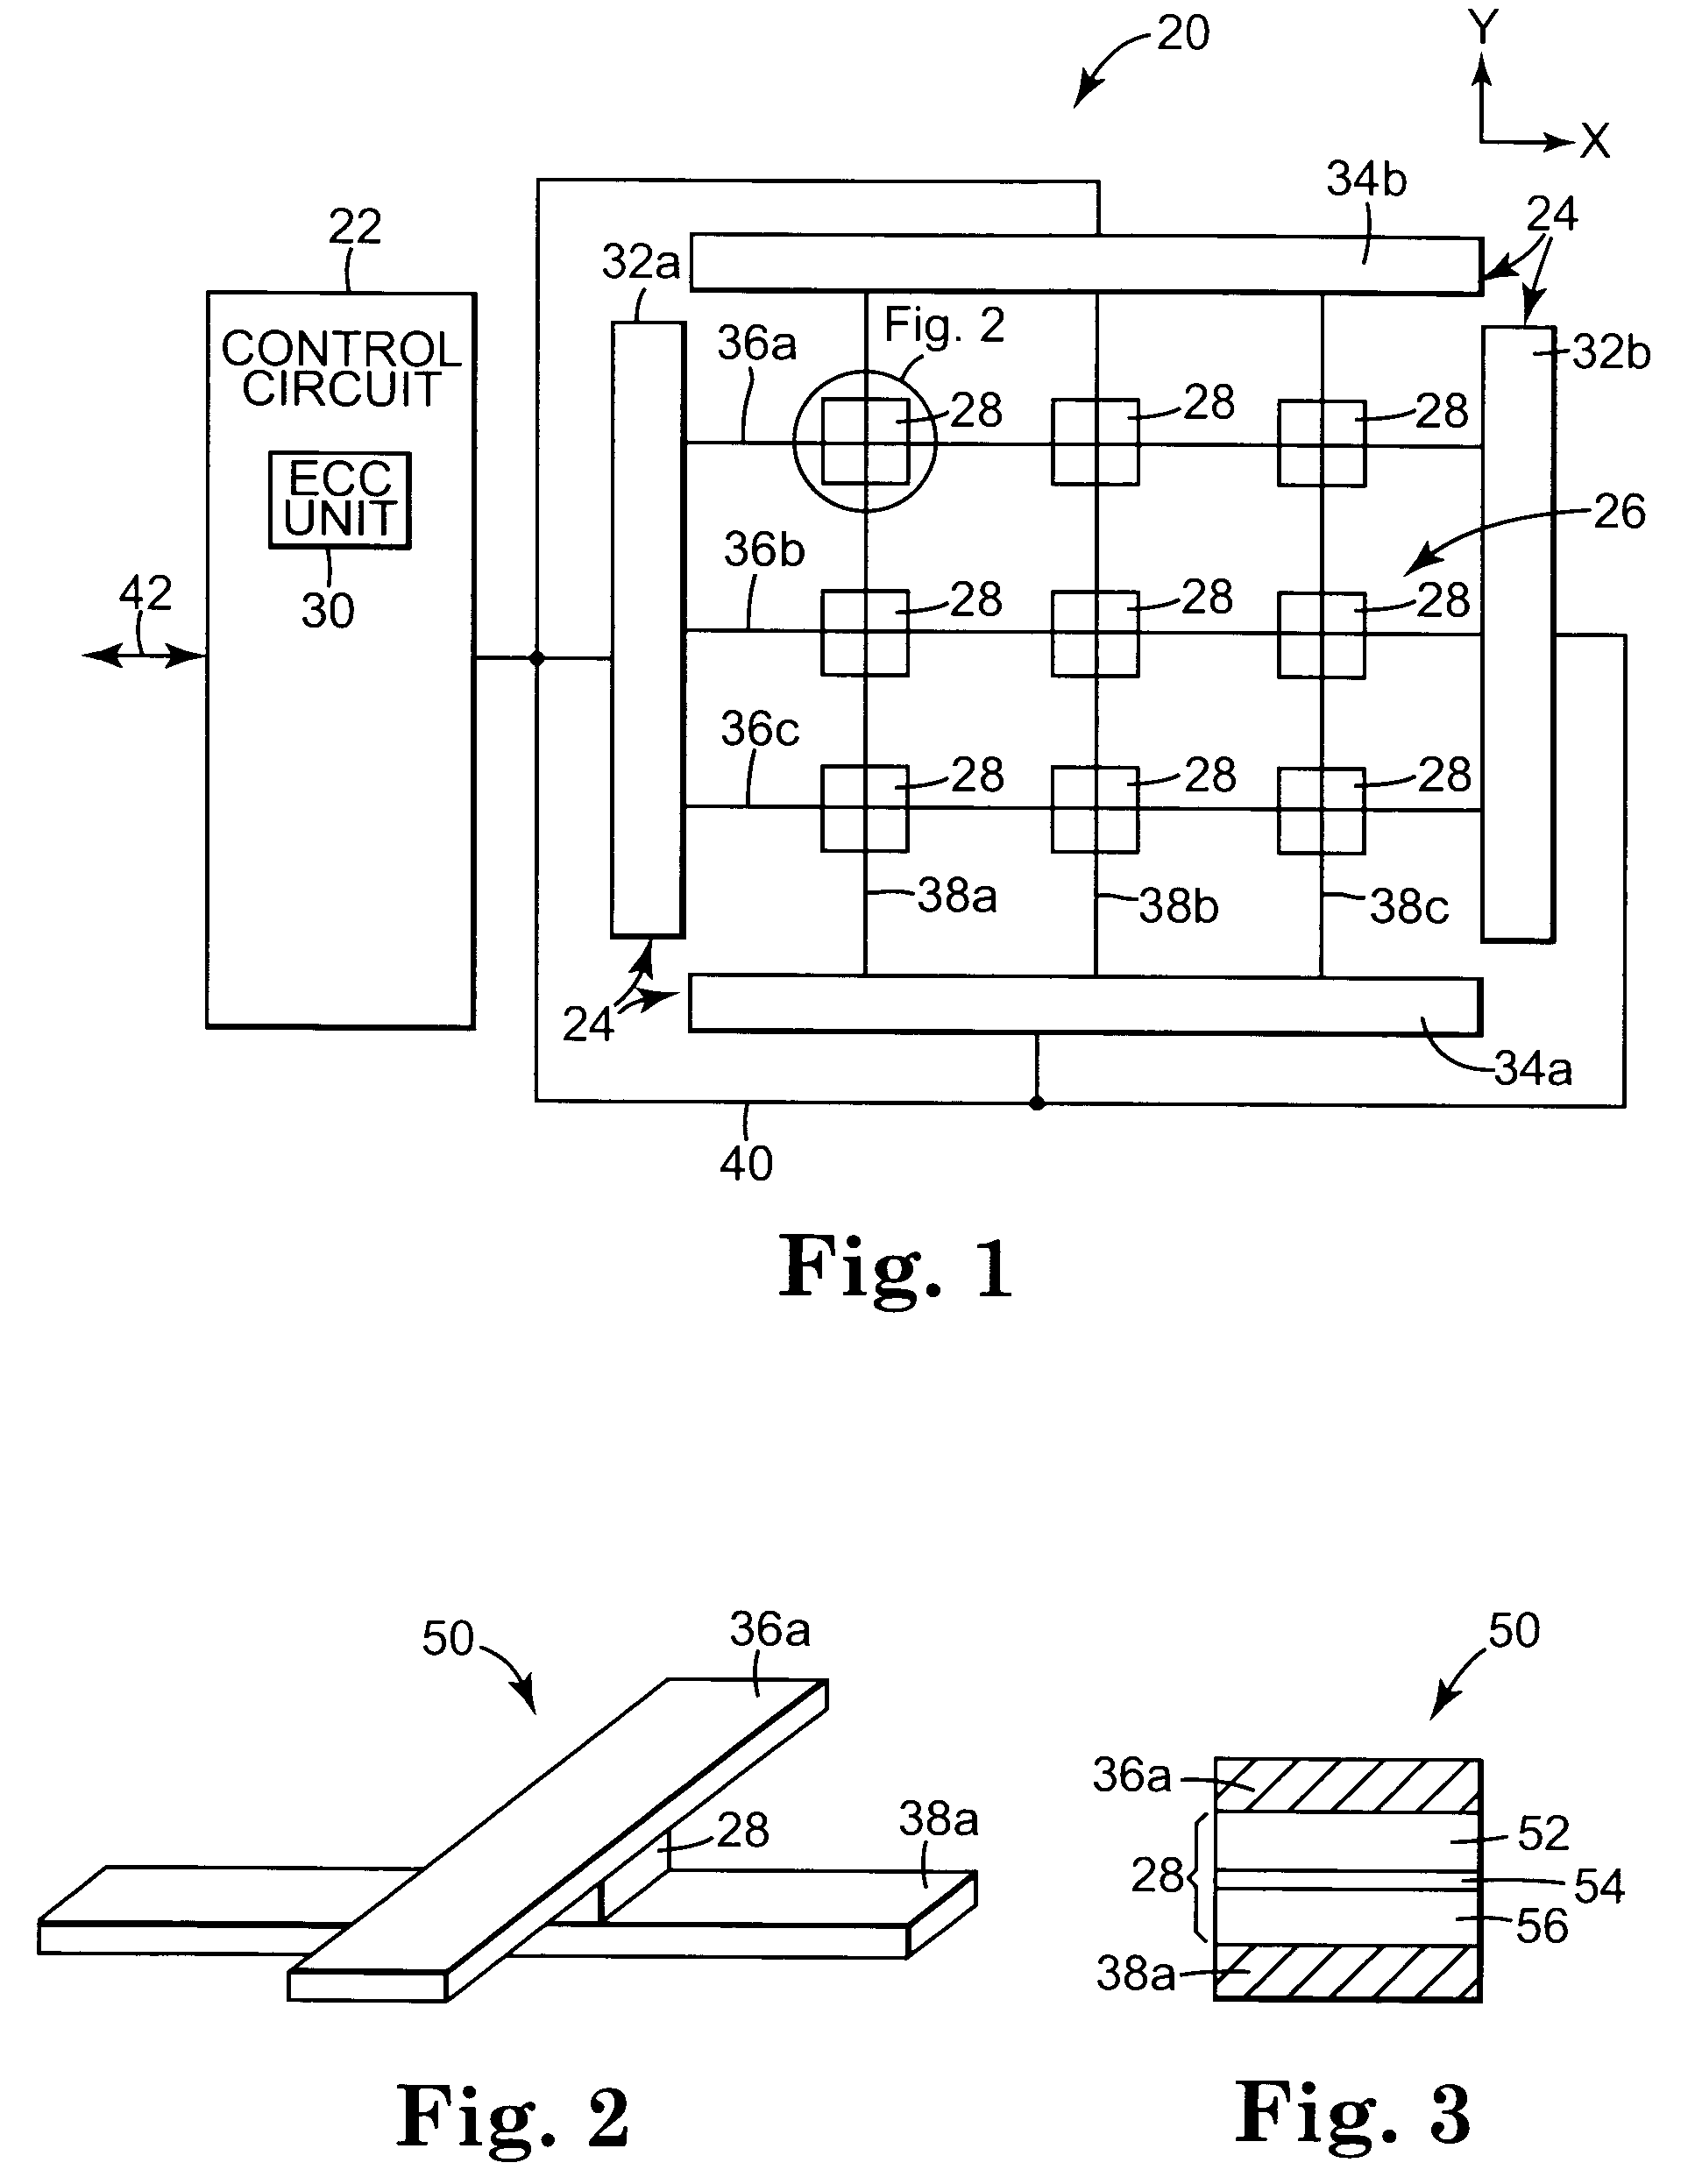 Magnetic memory with error correction coding